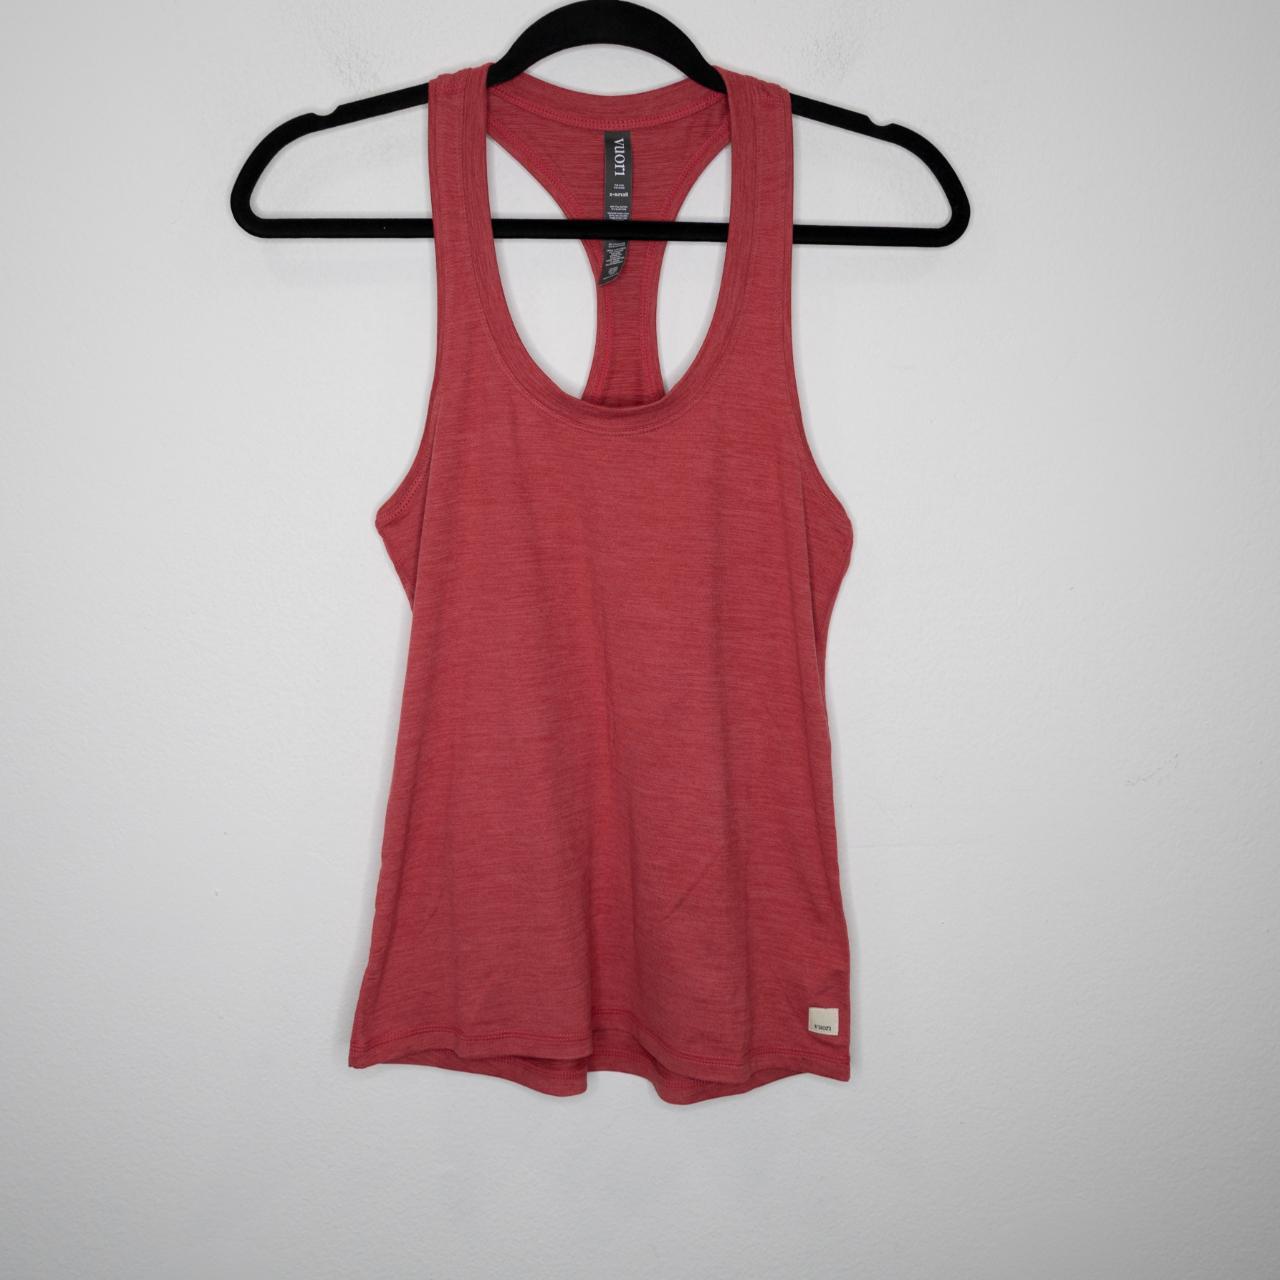 Lux Performance tank from Vuori in limited edition,... - Depop